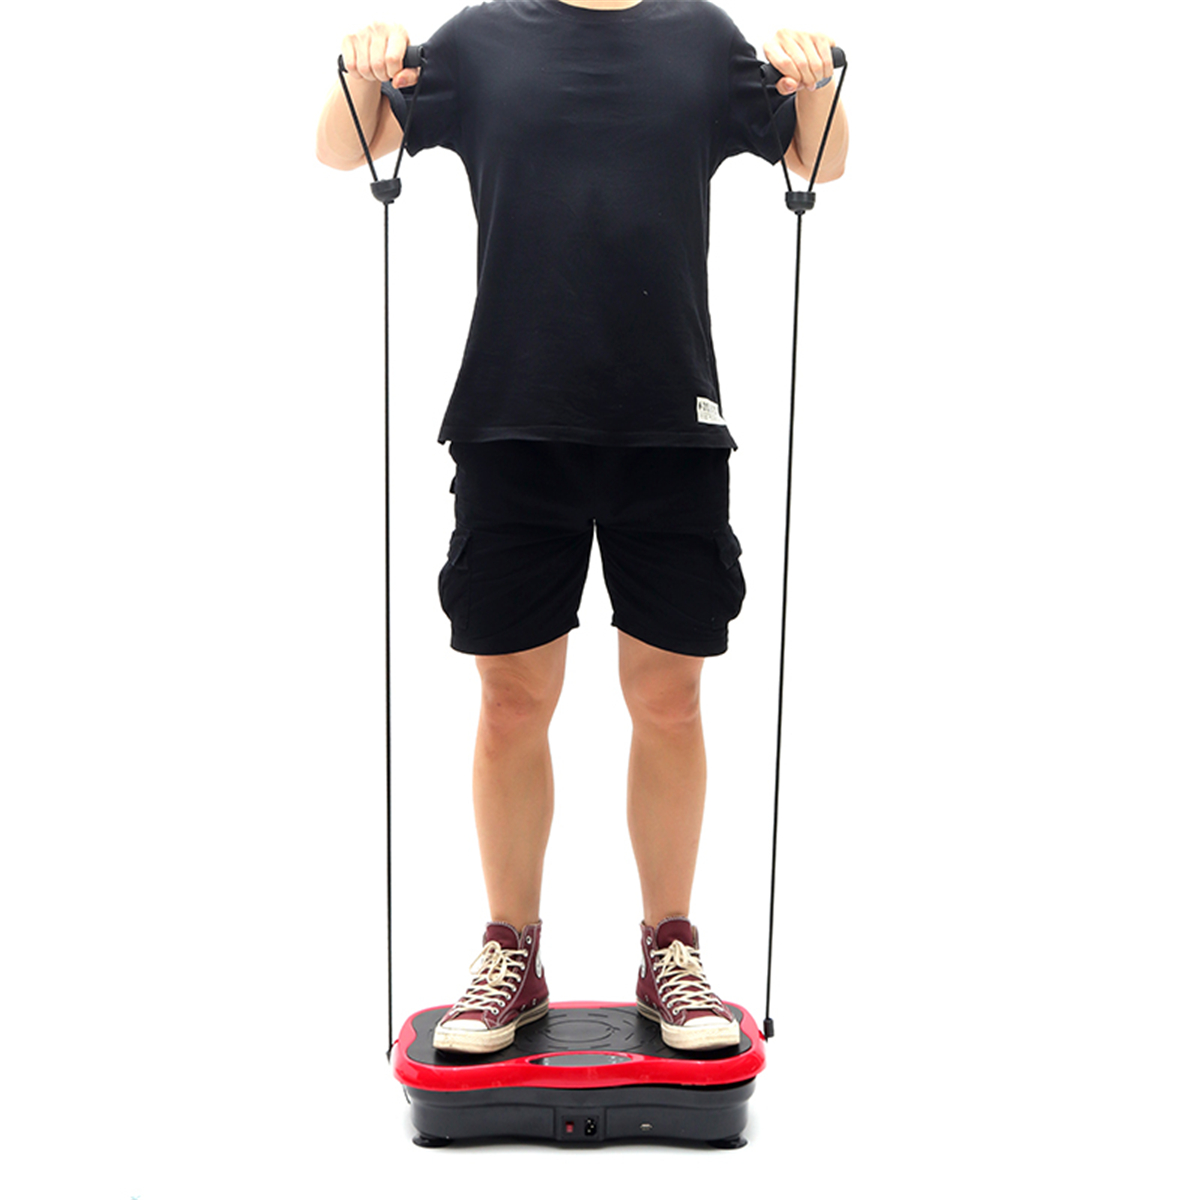 500W 180 Speed Levels Exercise Bench Adjustable Body Vibration Machine Slim Muscle Trainer Max Load 200kg